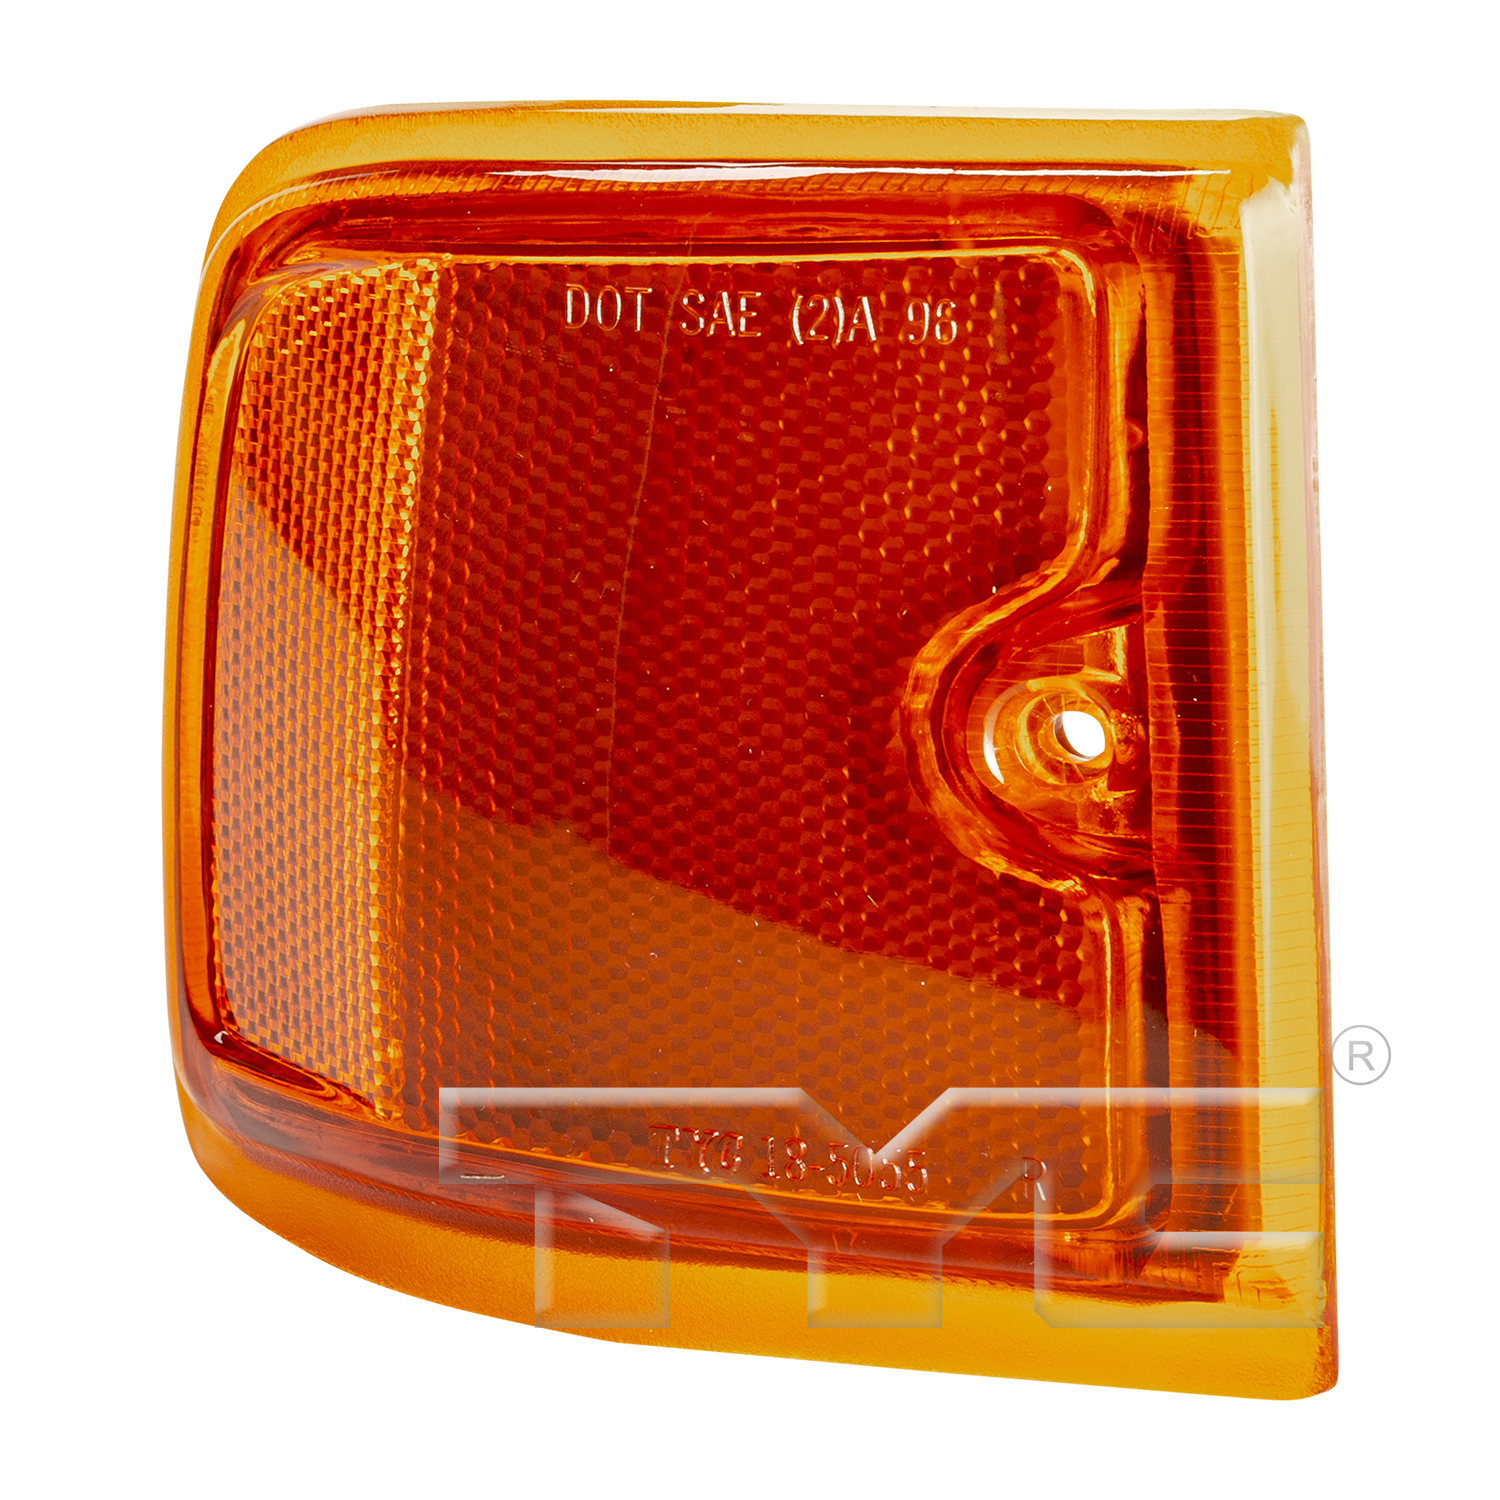 Aftermarket LAMPS for CHEVROLET - EXPRESS 2500, EXPRESS 2500,96-02,RT Front marker lamp assy